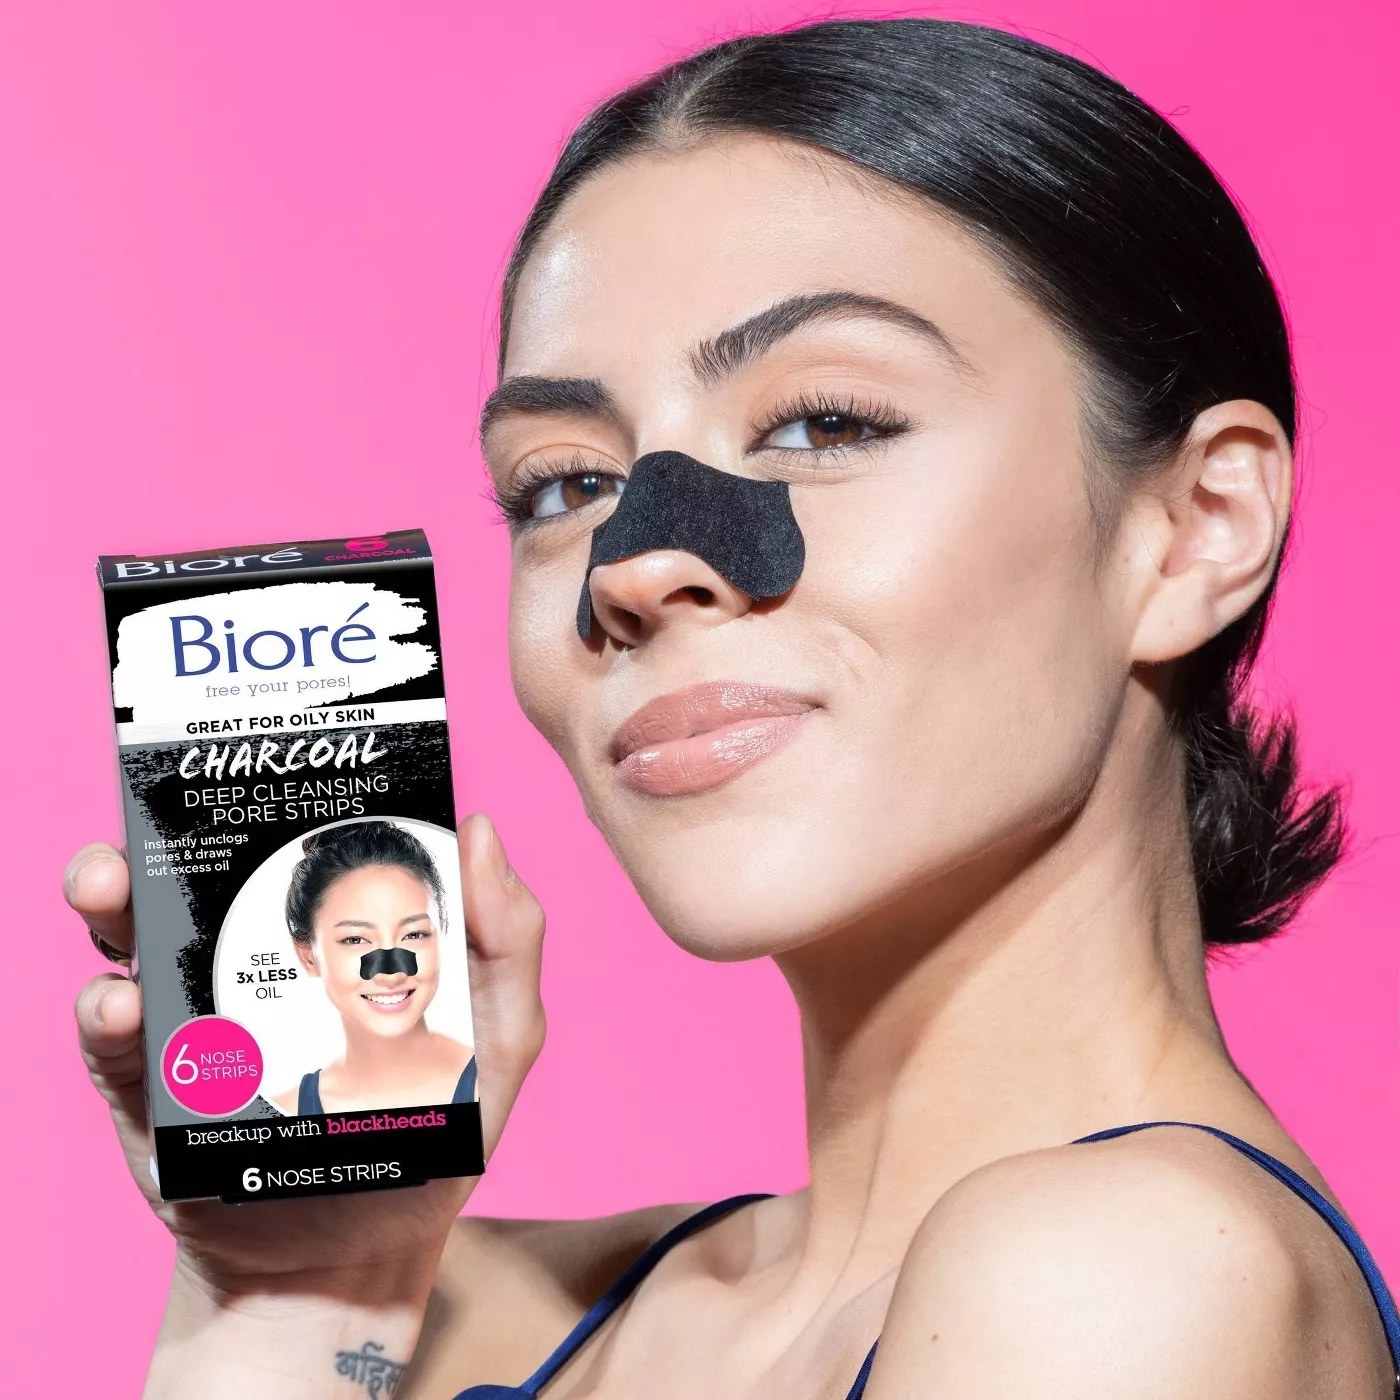 A model using a strip on their nose and holding the package of Biore charcoal deep cleansing pore strips 